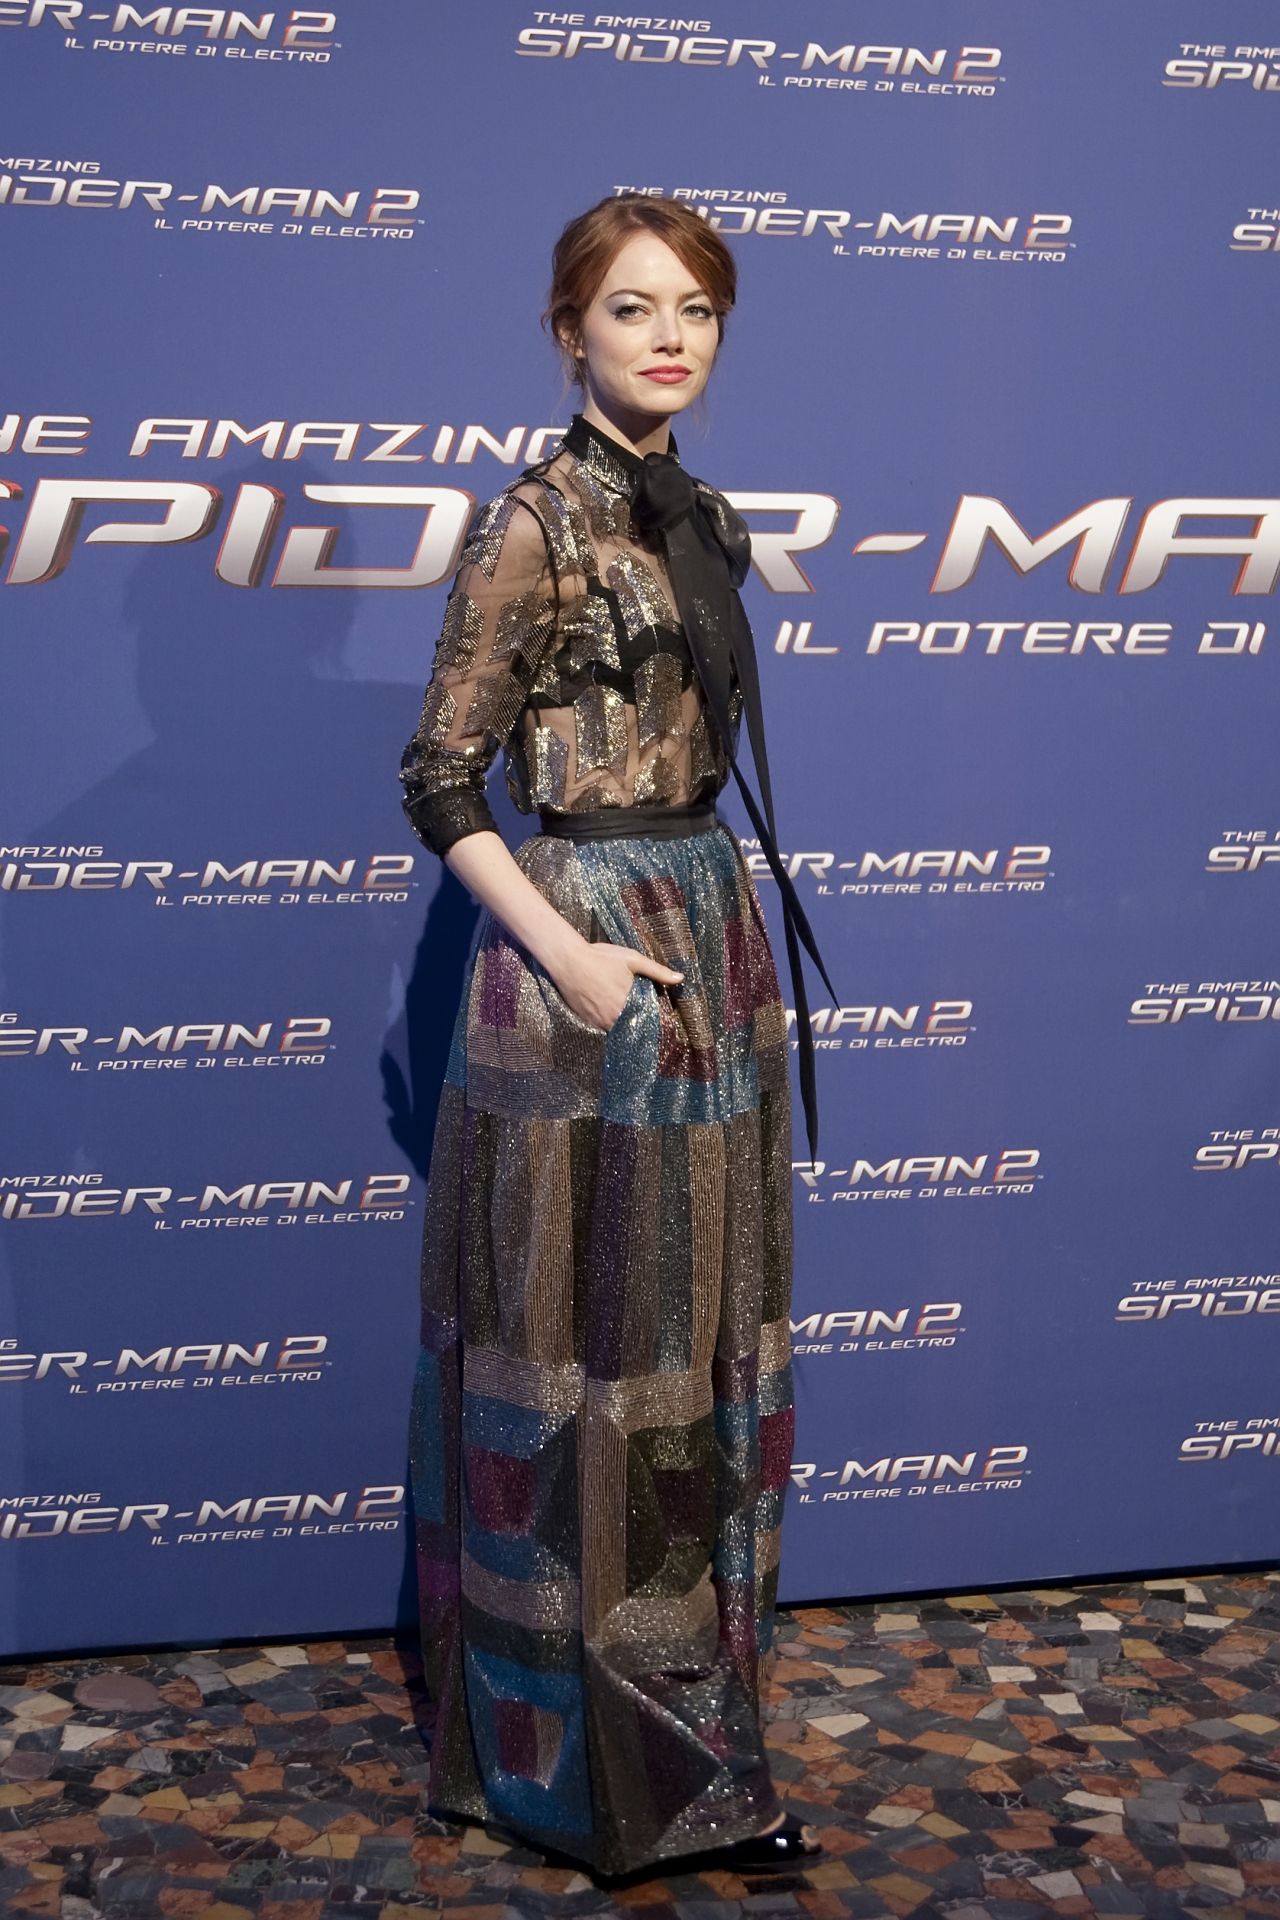 Emma Stone at THE AMAZING SPIDER-MAN 2 Premiere in Rome (Italy)